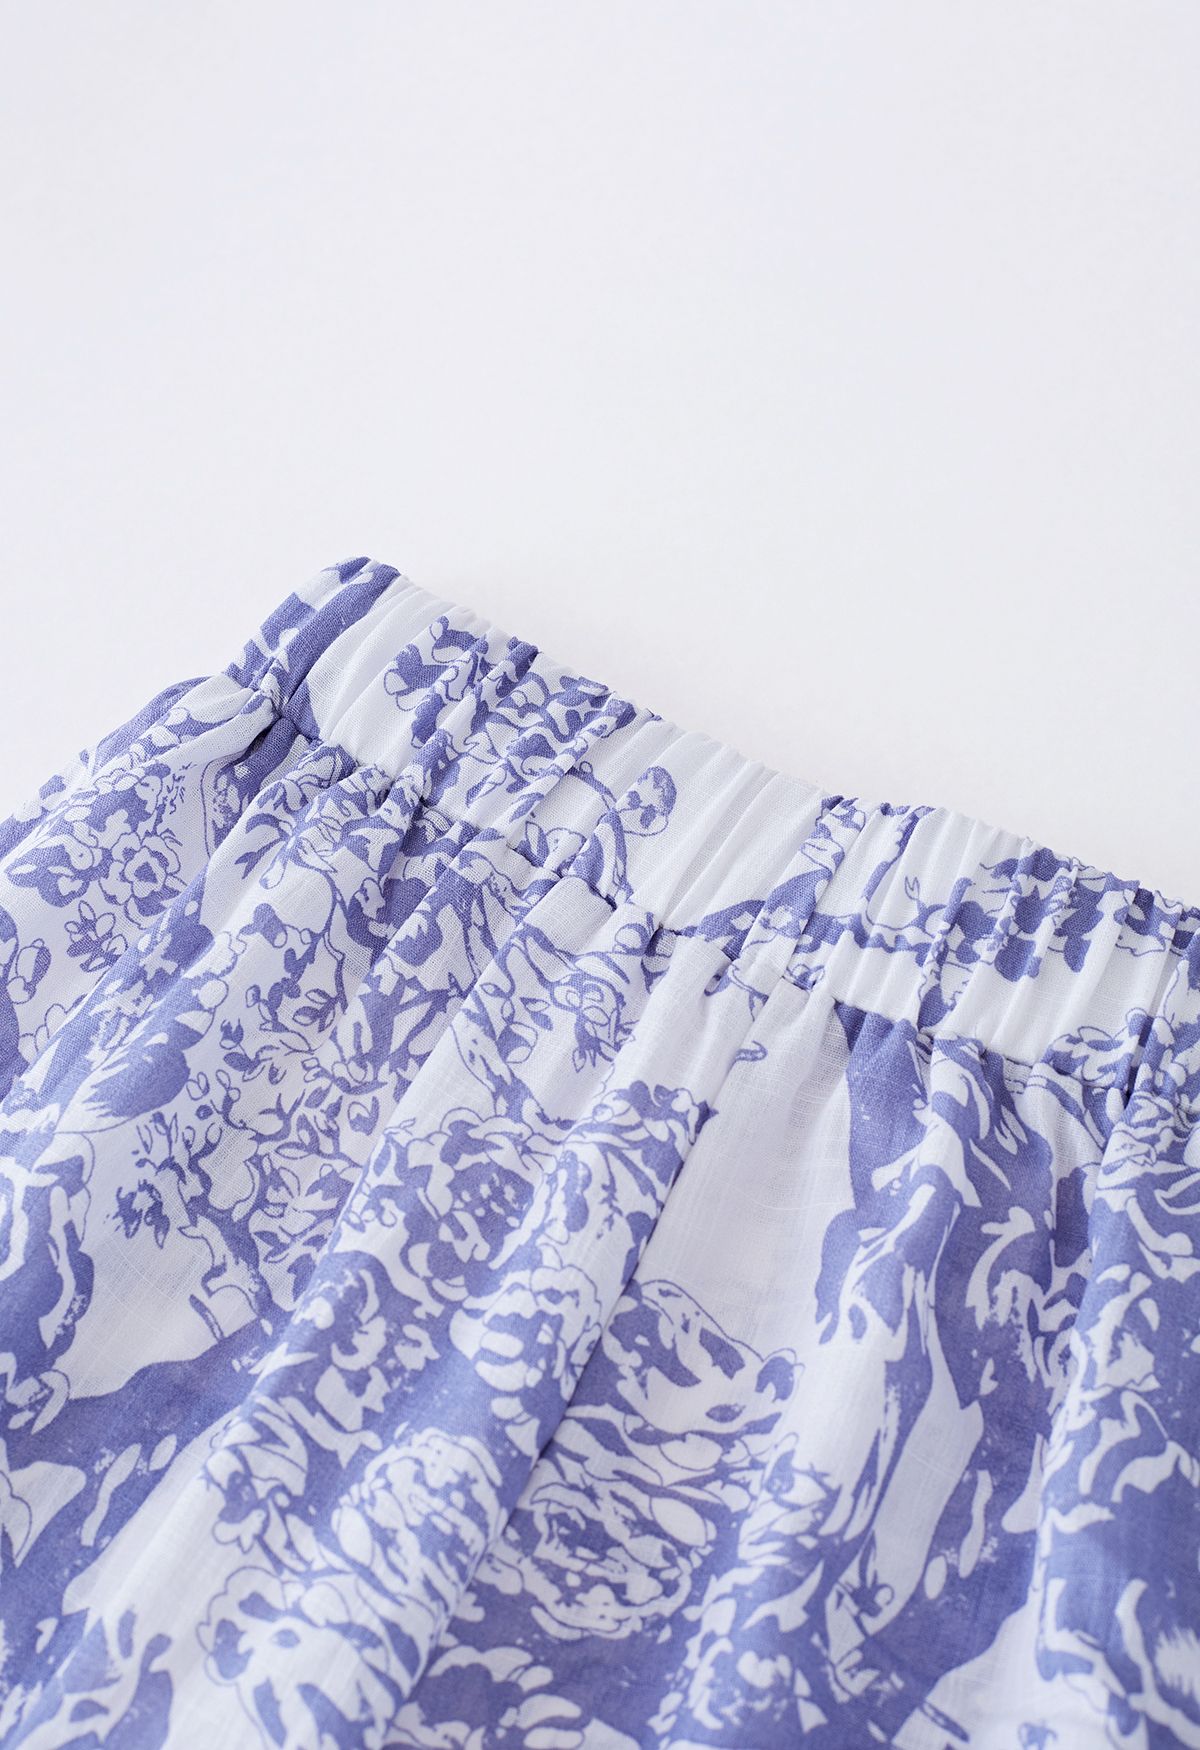 Branch Printed Breezy Frill Pants